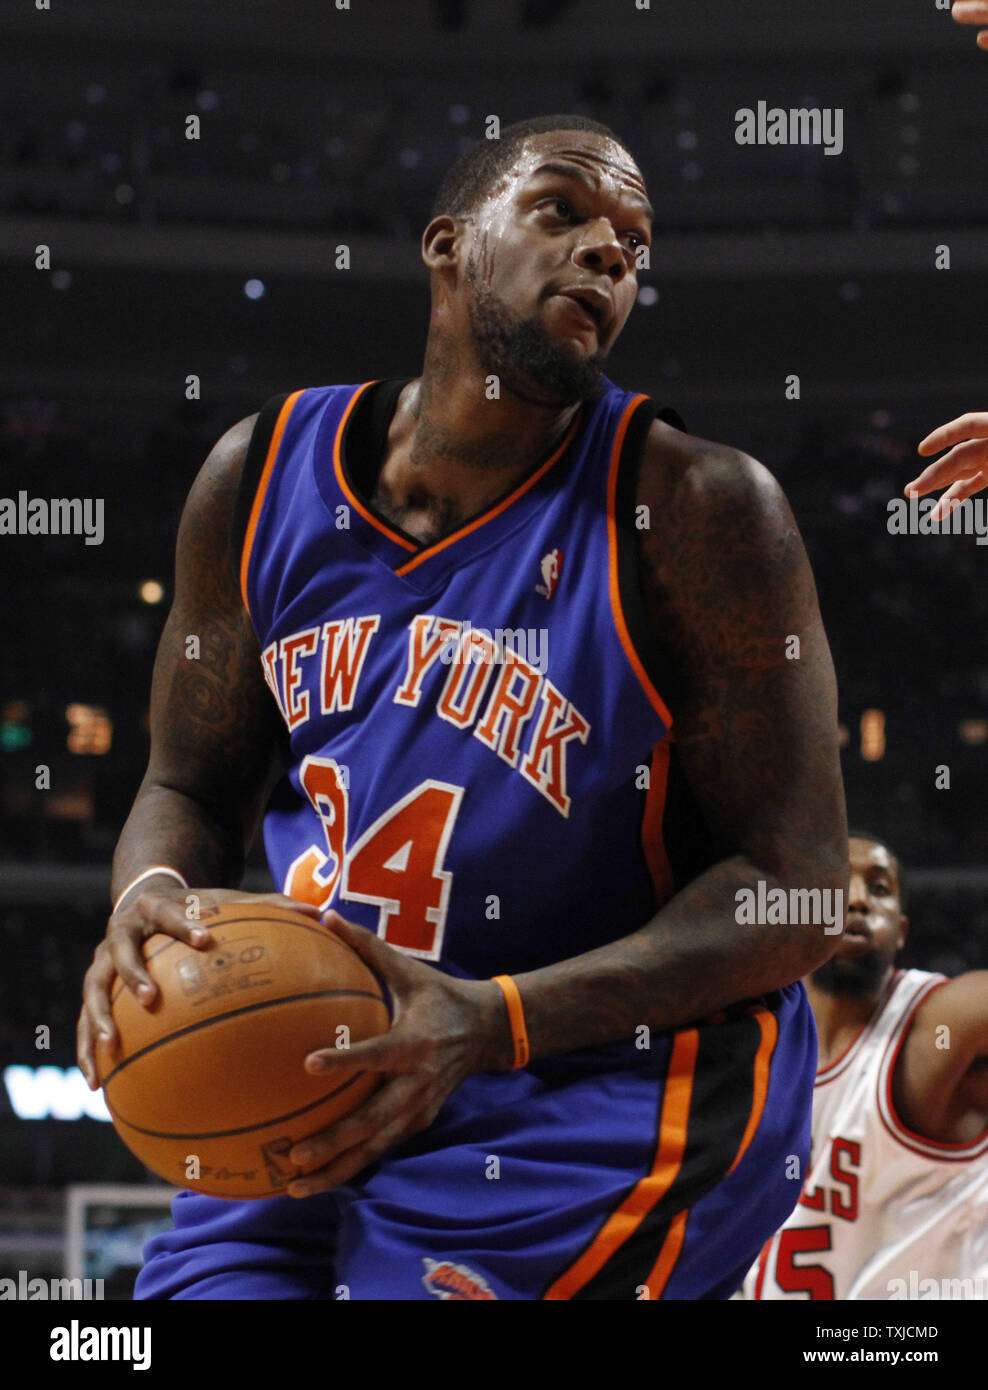 New York Knicks center Eddy Curry looks to shoot during the second quarter against the Chicago Bulls at the United Center in Chicago on December 17, 2009. The Bulls won 98-89.      UPI/Brian Kersey Stock Photo